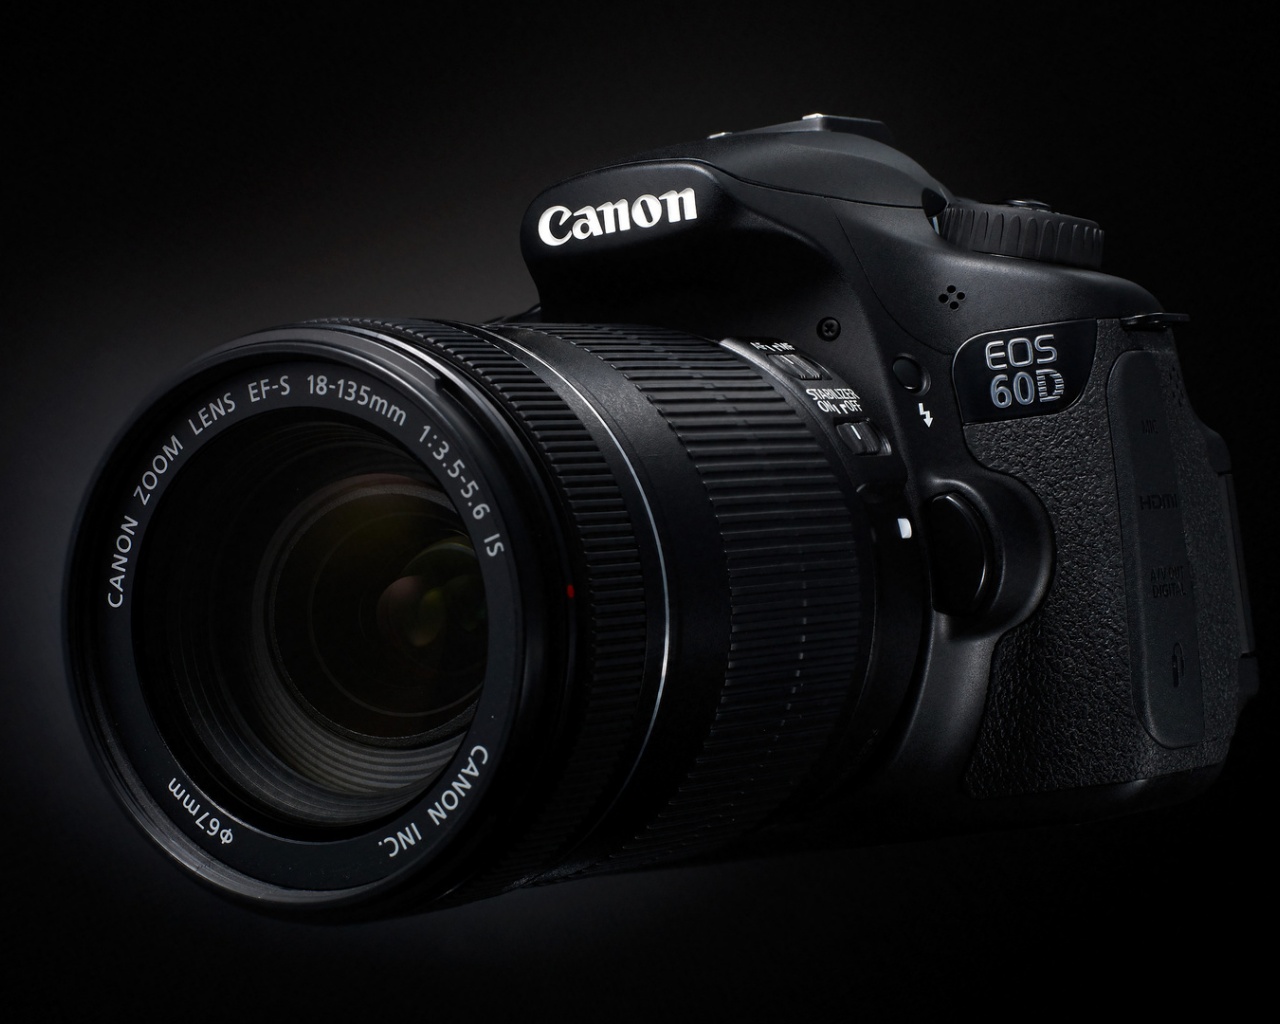 canon eos 60d with ef 18 135mm f 3 5 5 6 is lens canon is expected to ...